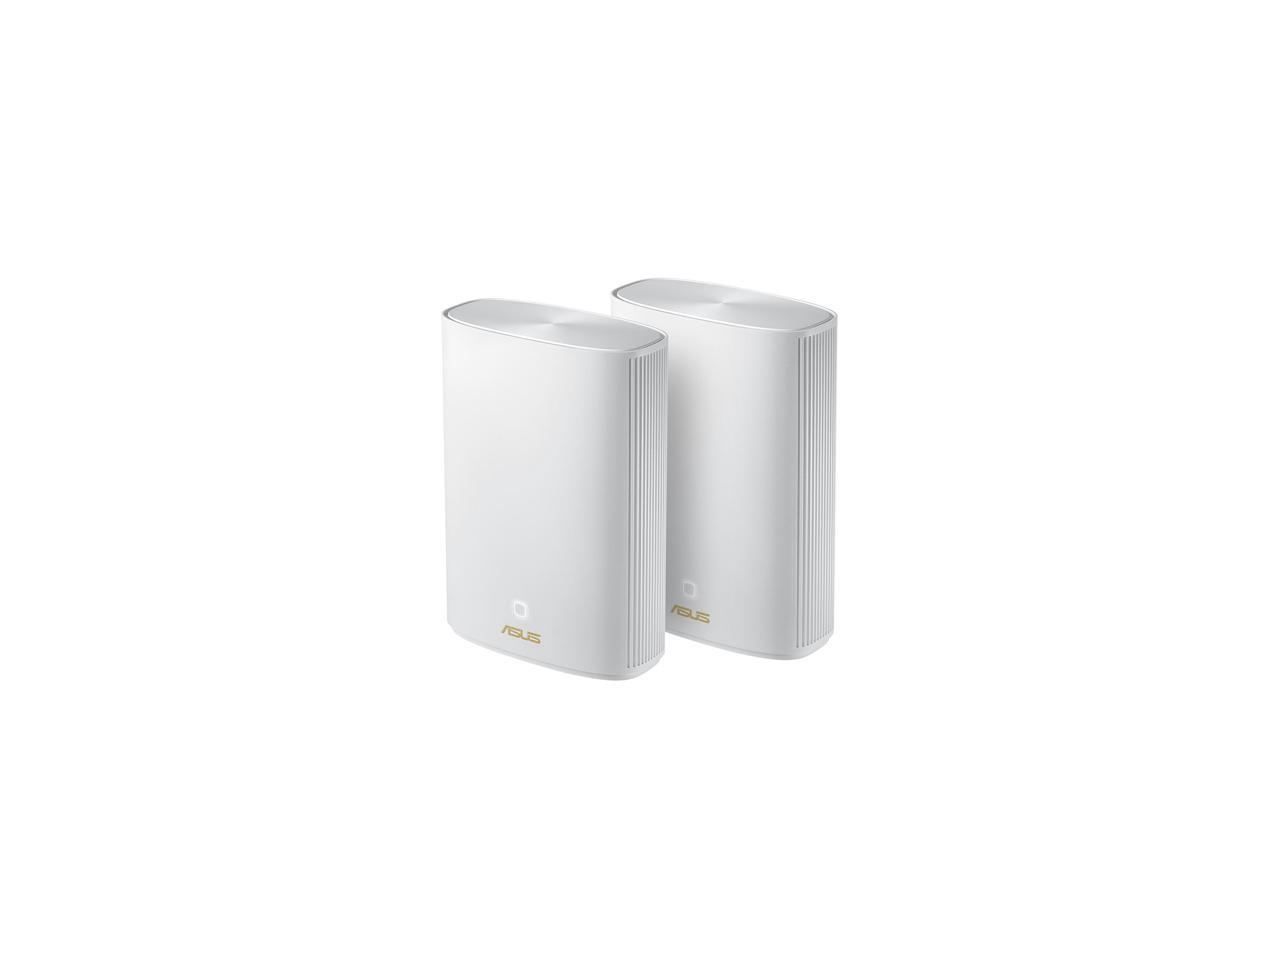 2-PK ASUS ZenWiFi AX Hybrid Powerline Mesh Routers WiFi 6 System (5,500 sq. ft. coverage) $250 + Free Shipping